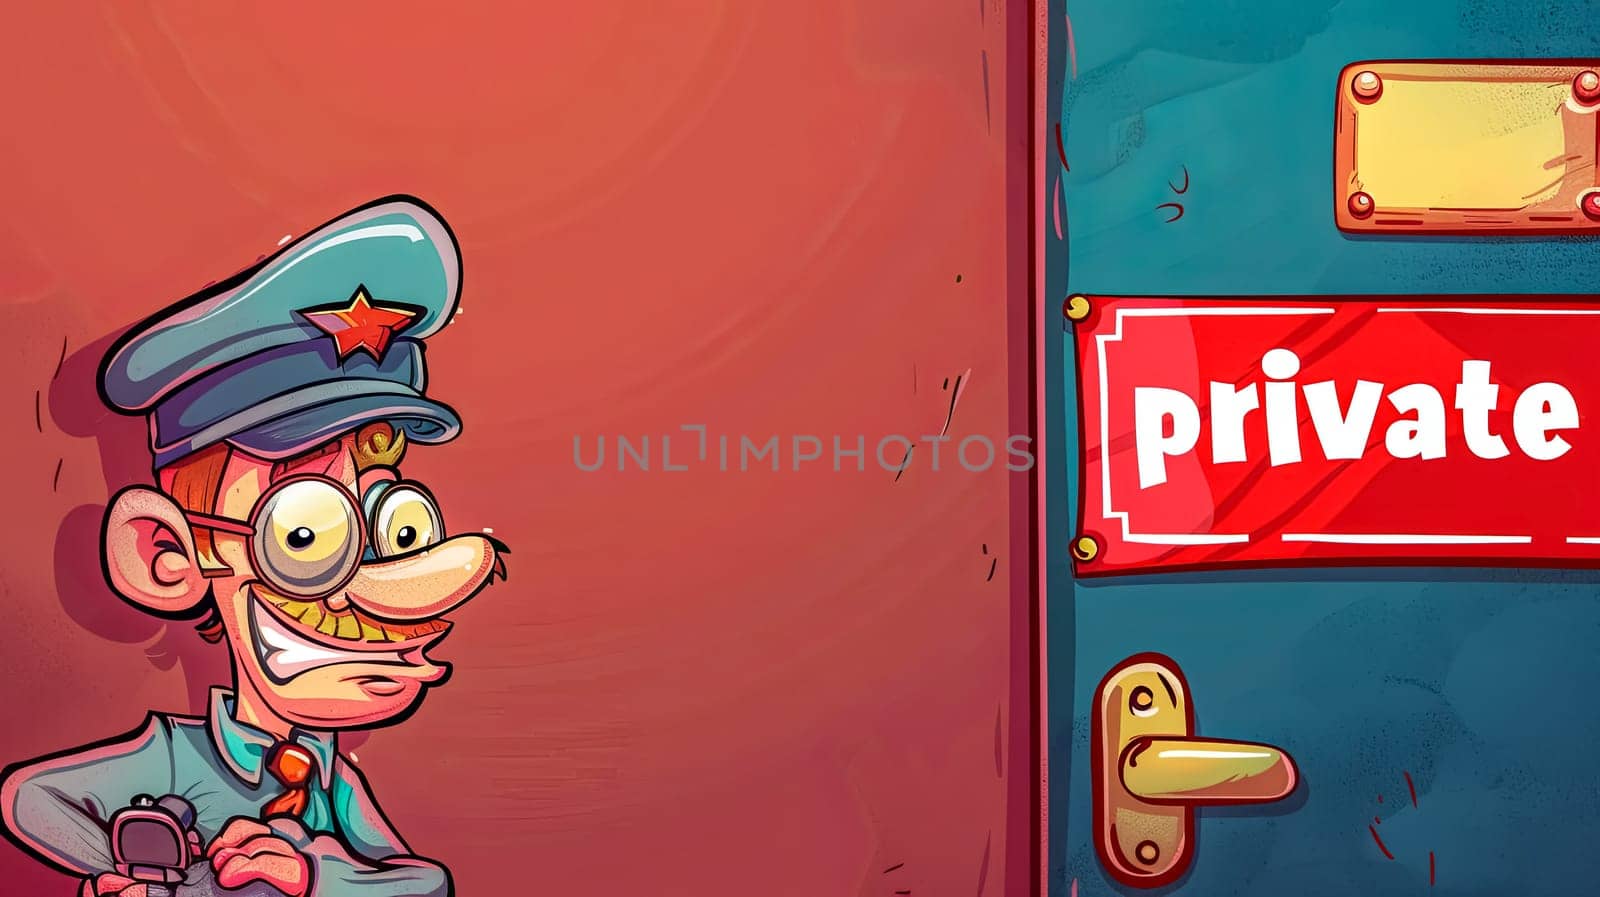 Cartoon security guard by private door sign by Edophoto